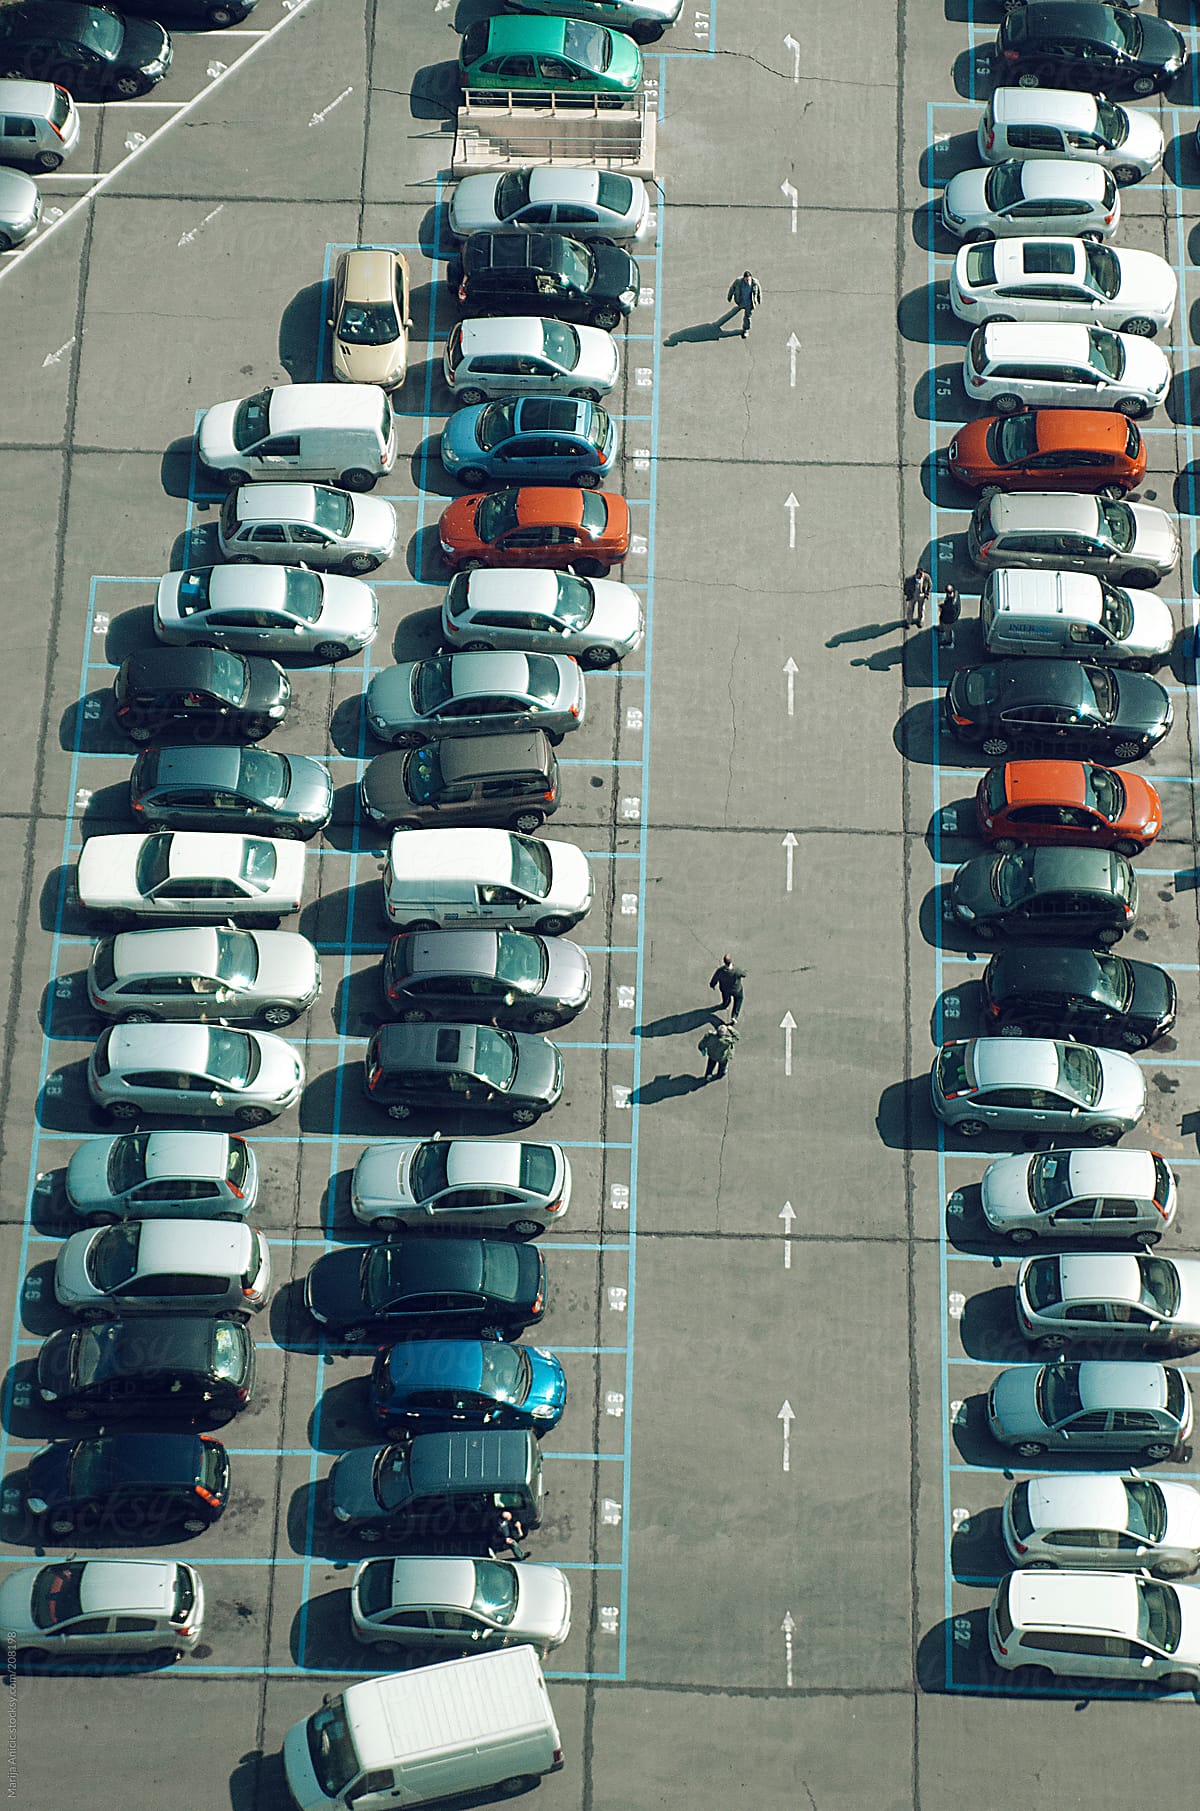 View from above,parking with lot of cars